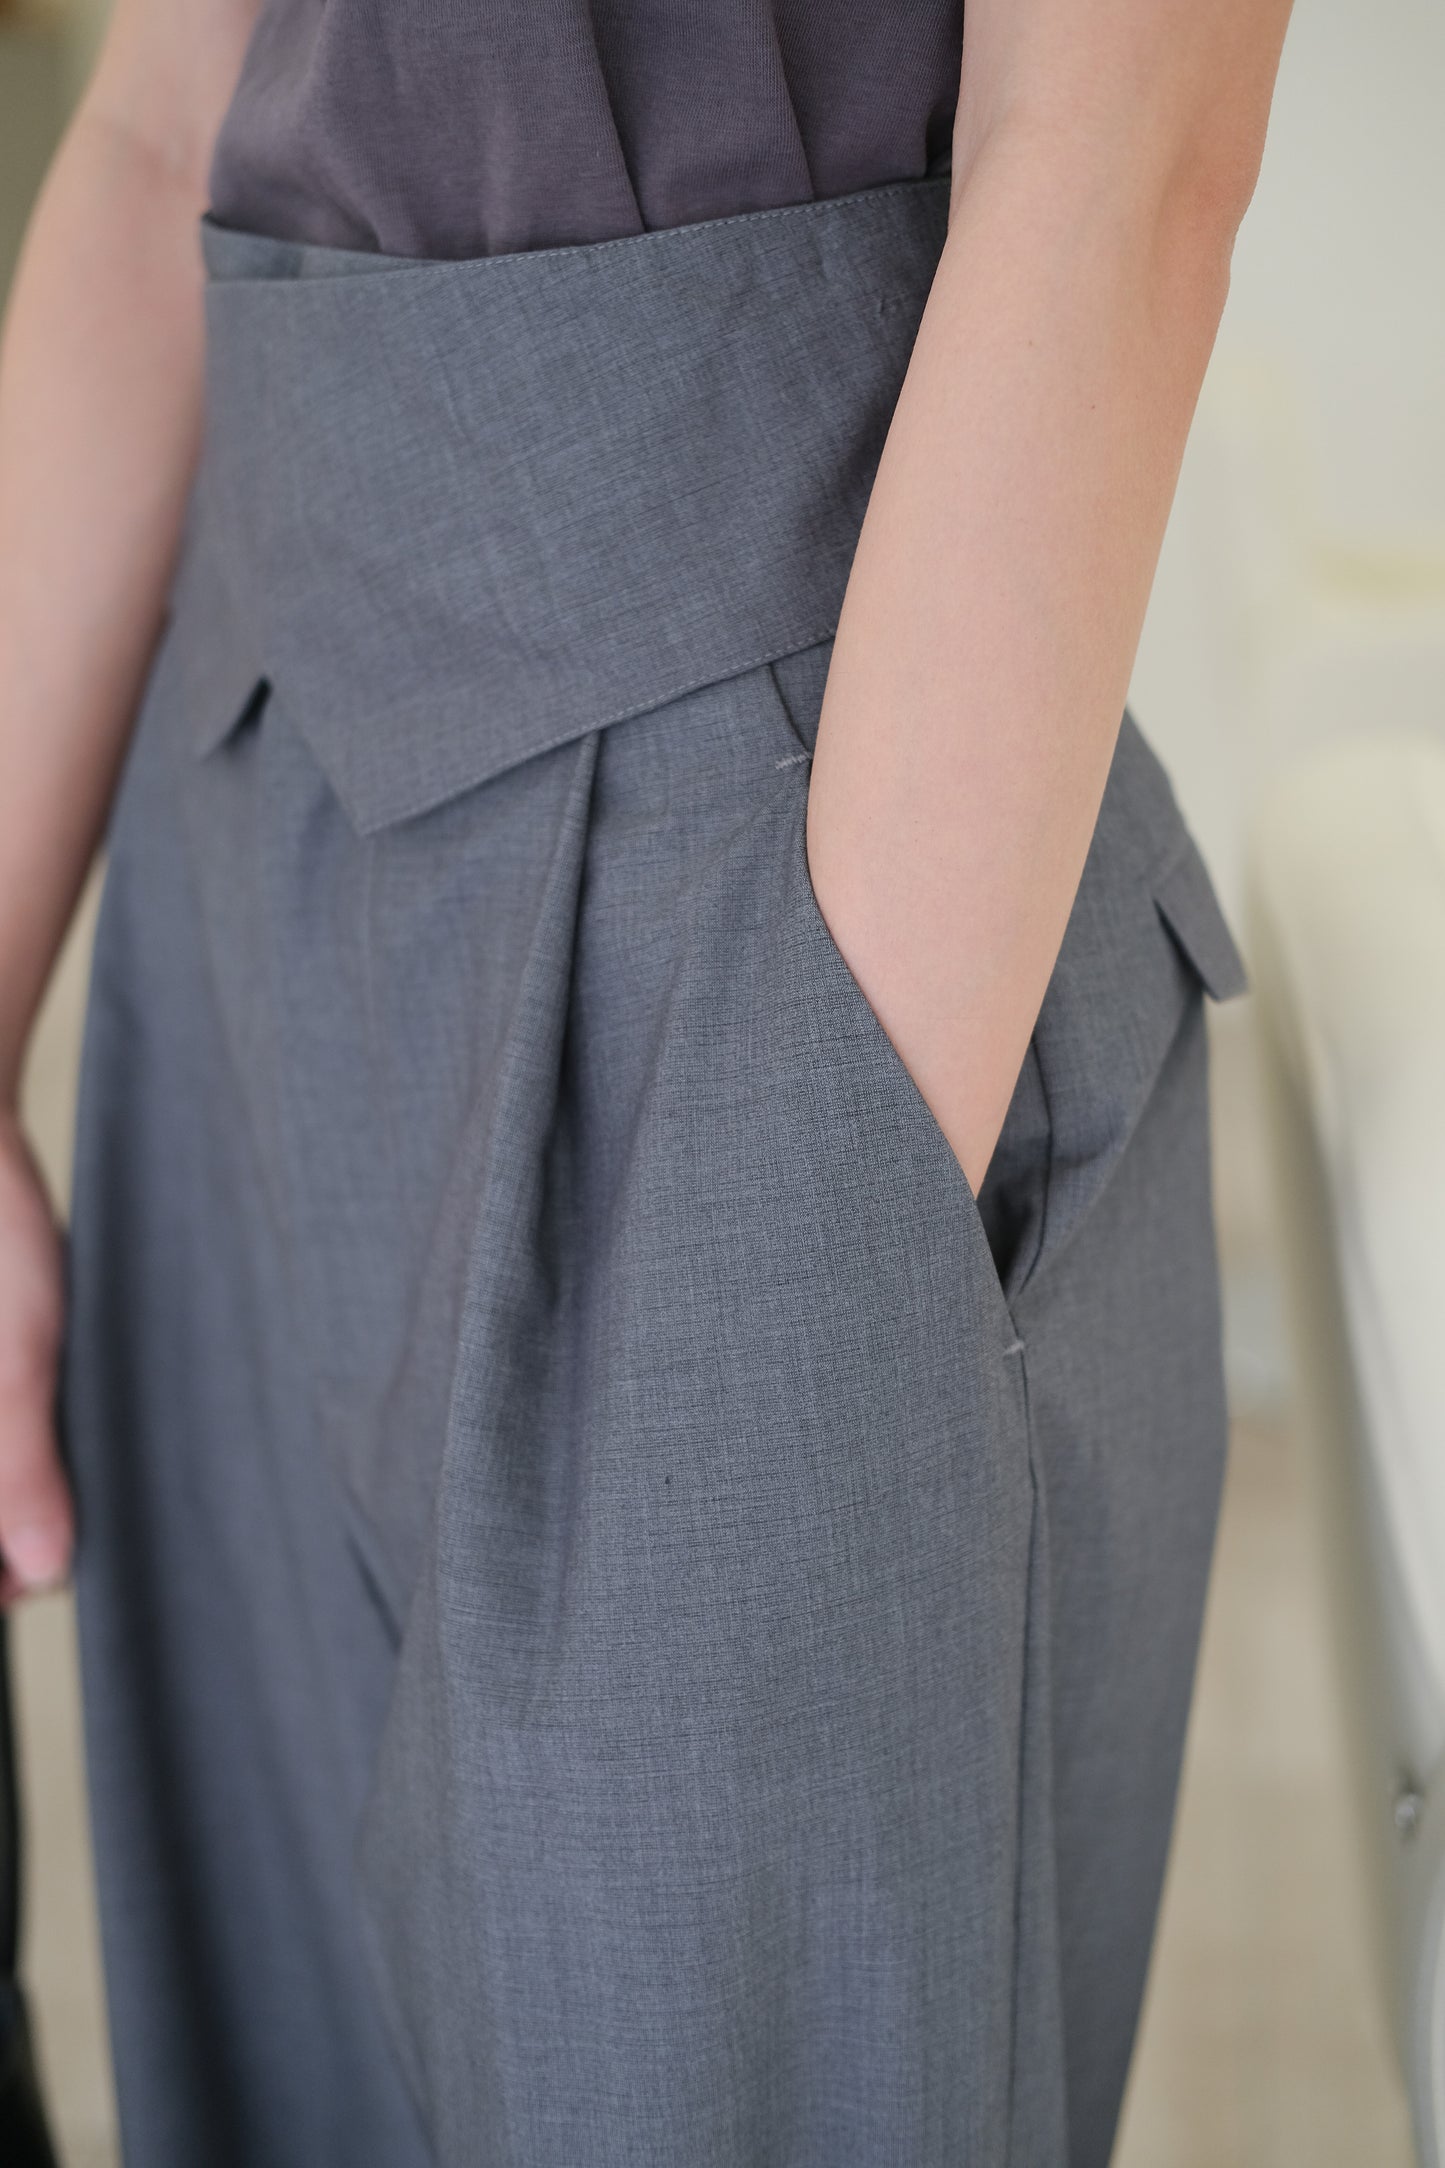 Adjustable button-up tabs and high-waisted wide-leg trousers in grey